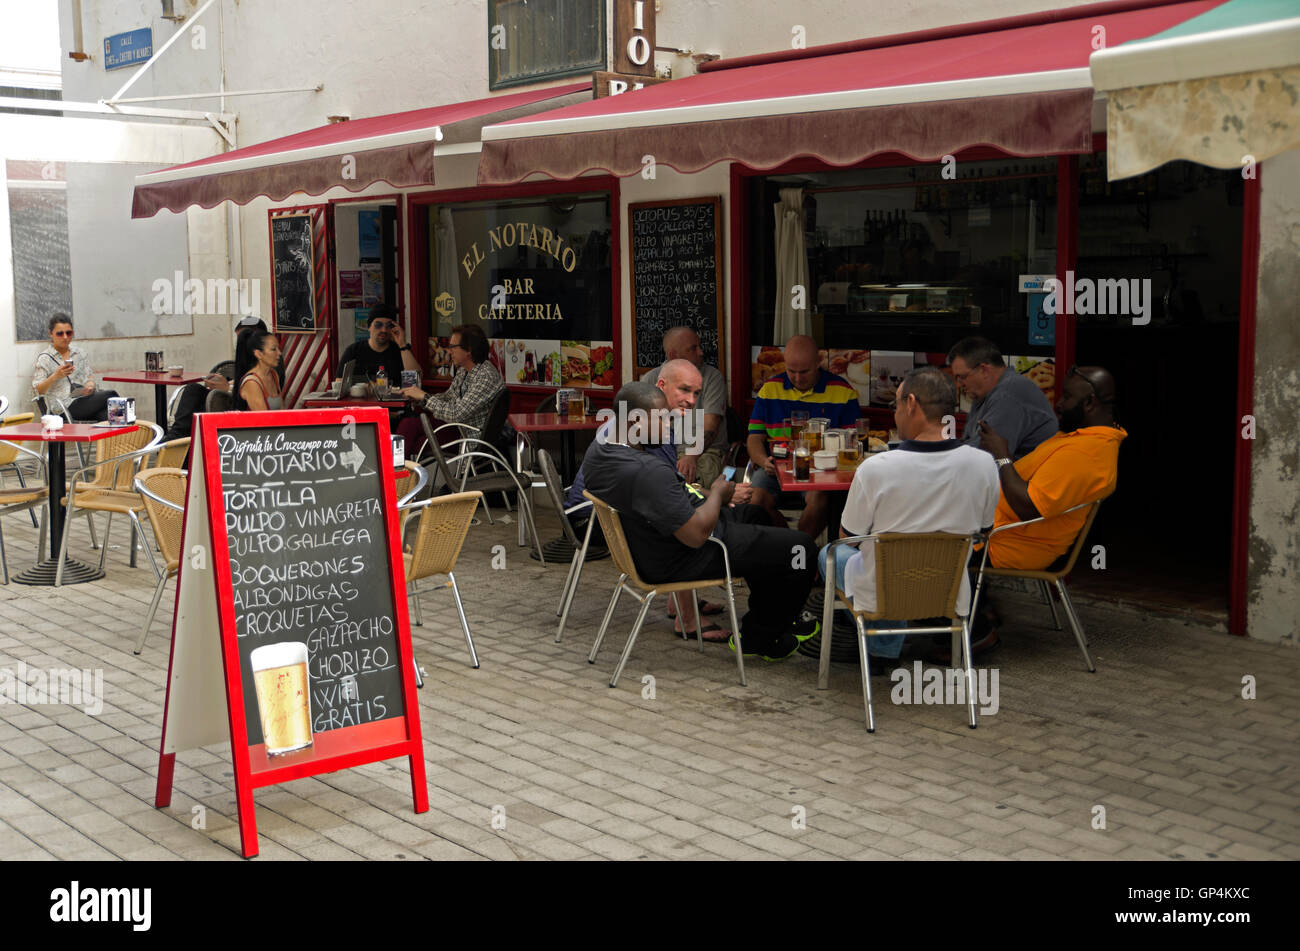 Men and women eating lunch at sidewalk cafes. Mobil phones in use by tourist at tables. Stock Photo